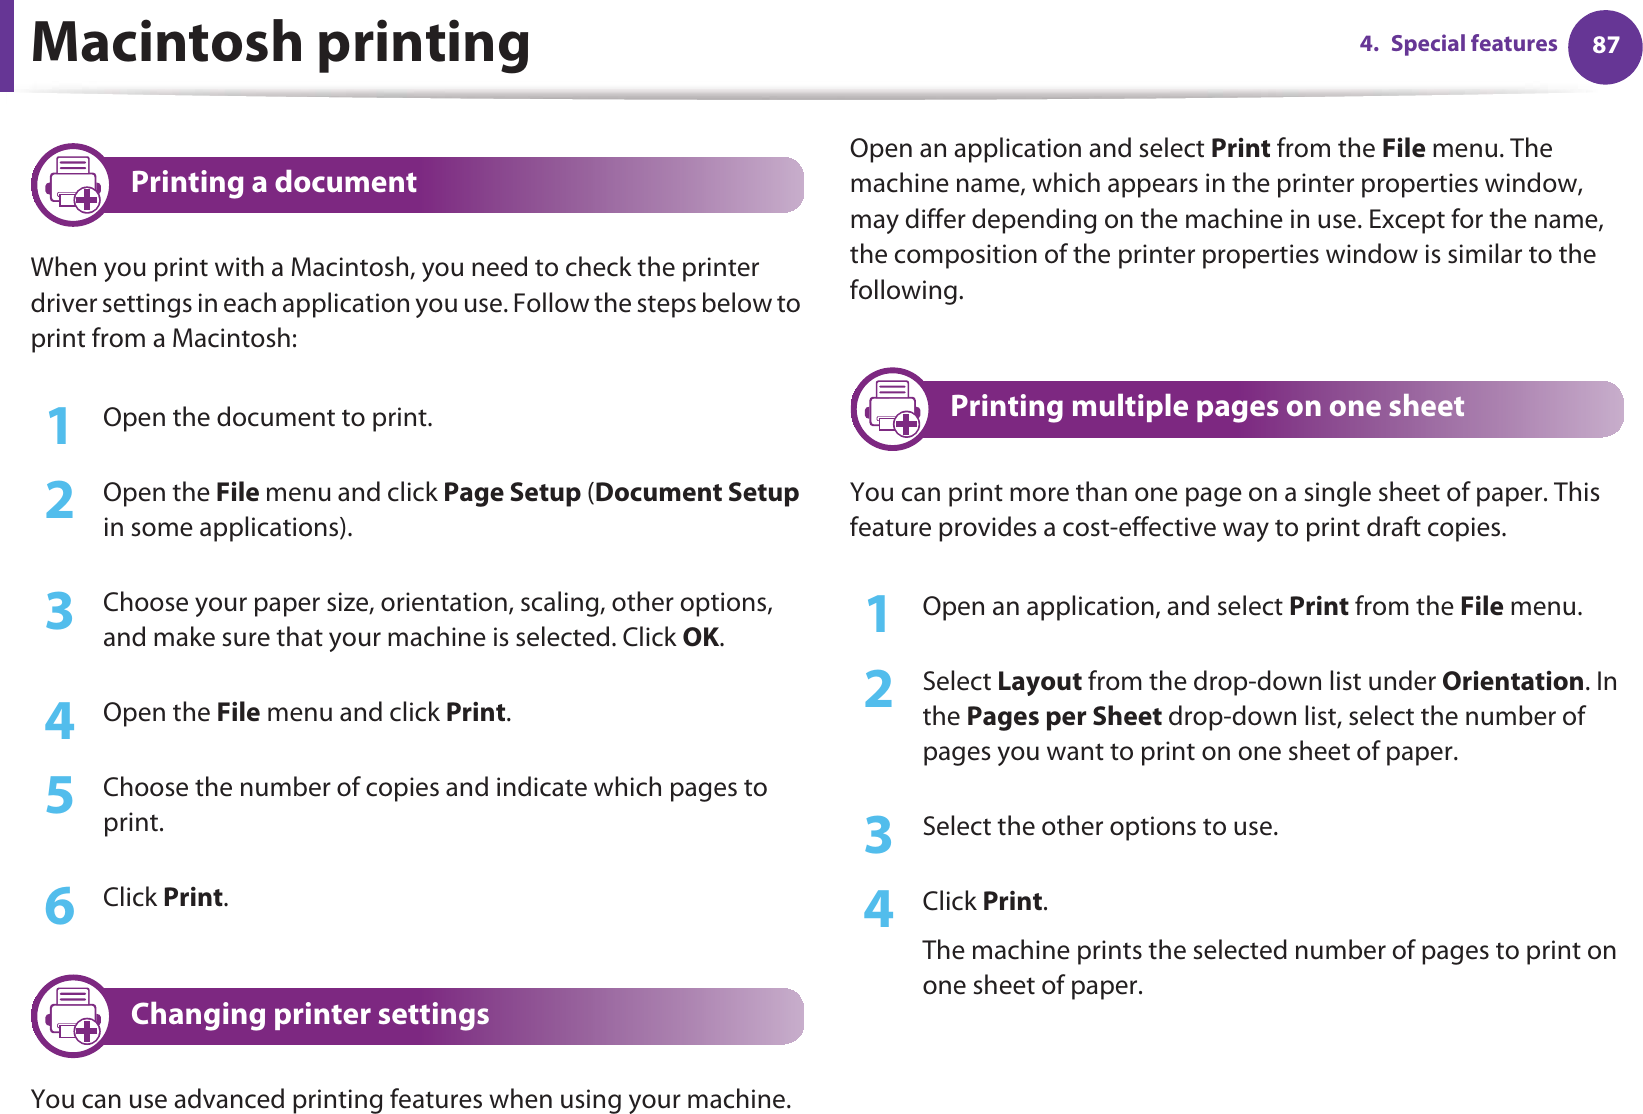 874. Special featuresMacintosh printing8 Printing a documentWhen you print with a Macintosh, you need to check the printer driver settings in each application you use. Follow the steps below to print from a Macintosh:1Open the document to print.2  Open the File menu and click Page Setup (Document Setup in some applications).3  Choose your paper size, orientation, scaling, other options, and make sure that your machine is selected. Click OK.4  Open the File menu and click Print. 5  Choose the number of copies and indicate which pages to print. 6  Click Print.9 Changing printer settingsYou can use advanced printing features when using your machine.Open an application and select Print from the File menu. The machine name, which appears in the printer properties window, may differ depending on the machine in use. Except for the name, the composition of the printer properties window is similar to the following.10 Printing multiple pages on one sheet You can print more than one page on a single sheet of paper. This feature provides a cost-effective way to print draft copies.1Open an application, and select Print from the File menu.2  Select Layout from the drop-down list under Orientation. In the Pages per Sheet drop-down list, select the number of pages you want to print on one sheet of paper.3  Select the other options to use.4  Click Print. The machine prints the selected number of pages to print on one sheet of paper.